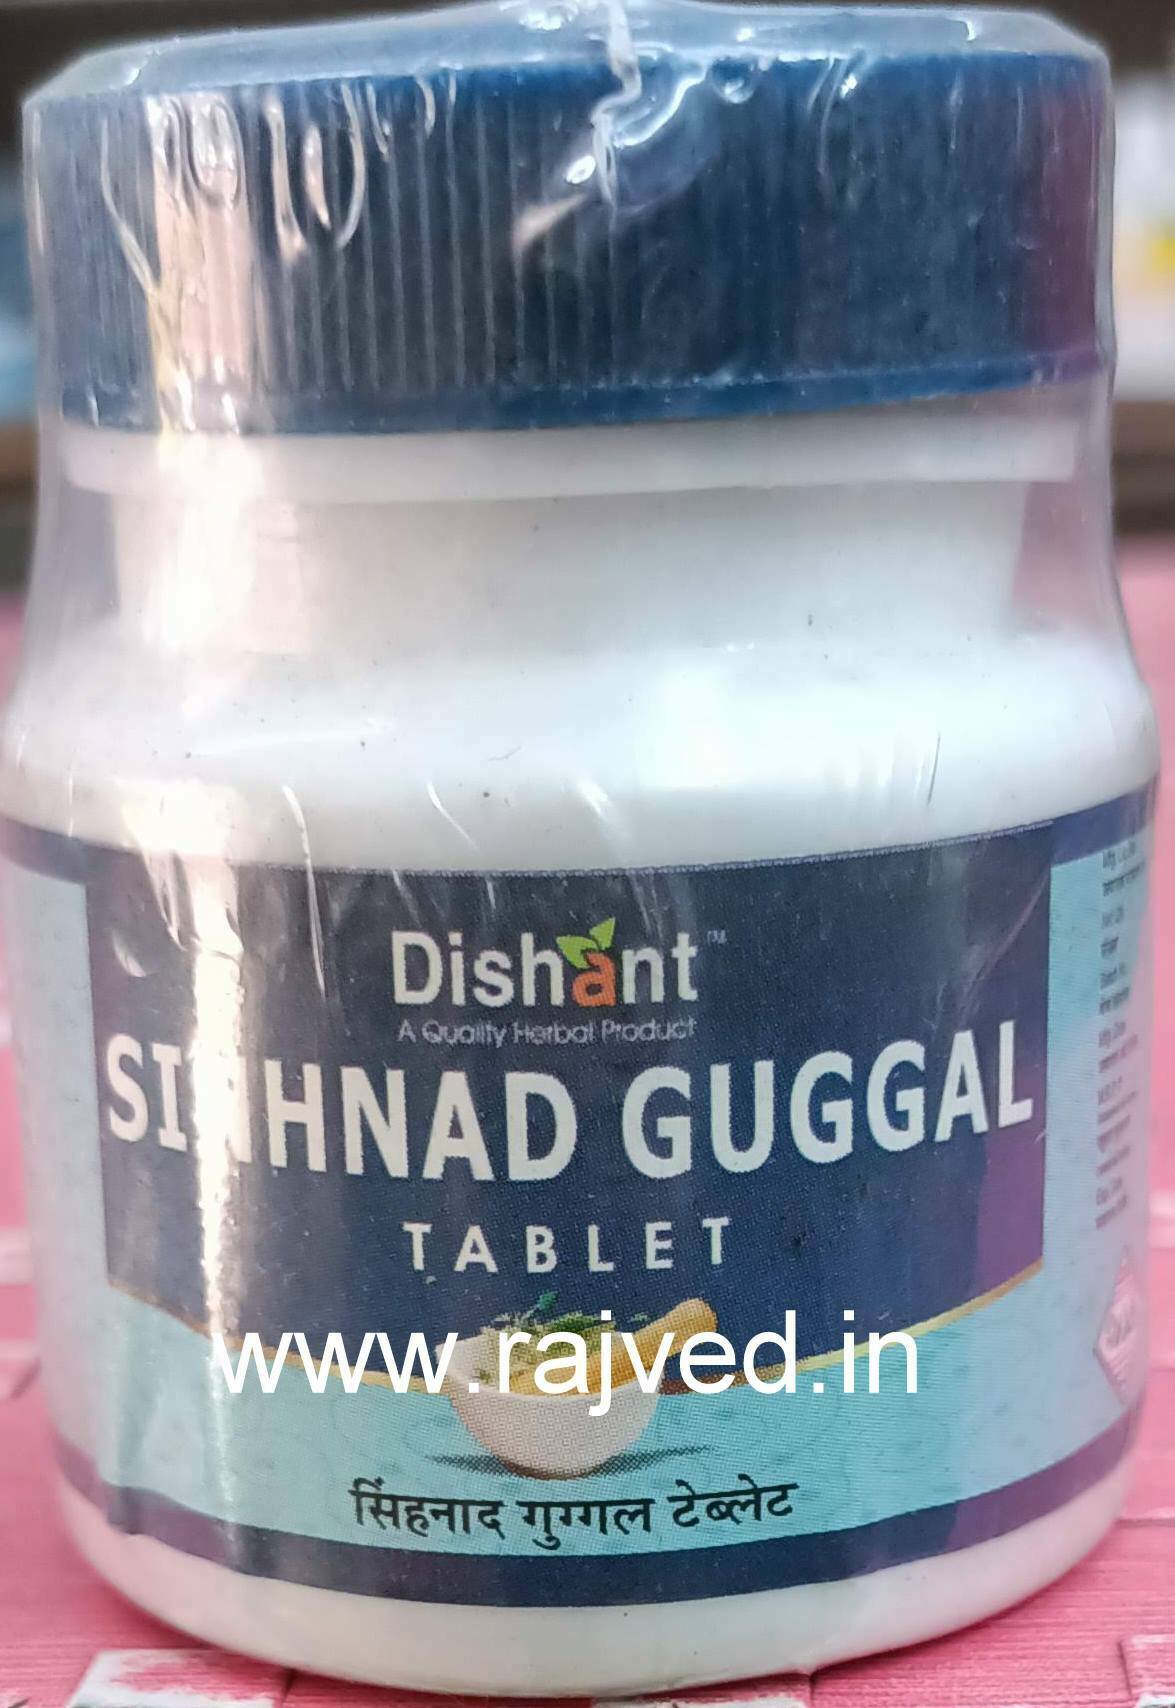 sihnad guggul tablets 500 gm upto 20% off dishant ayurvedic suppliers